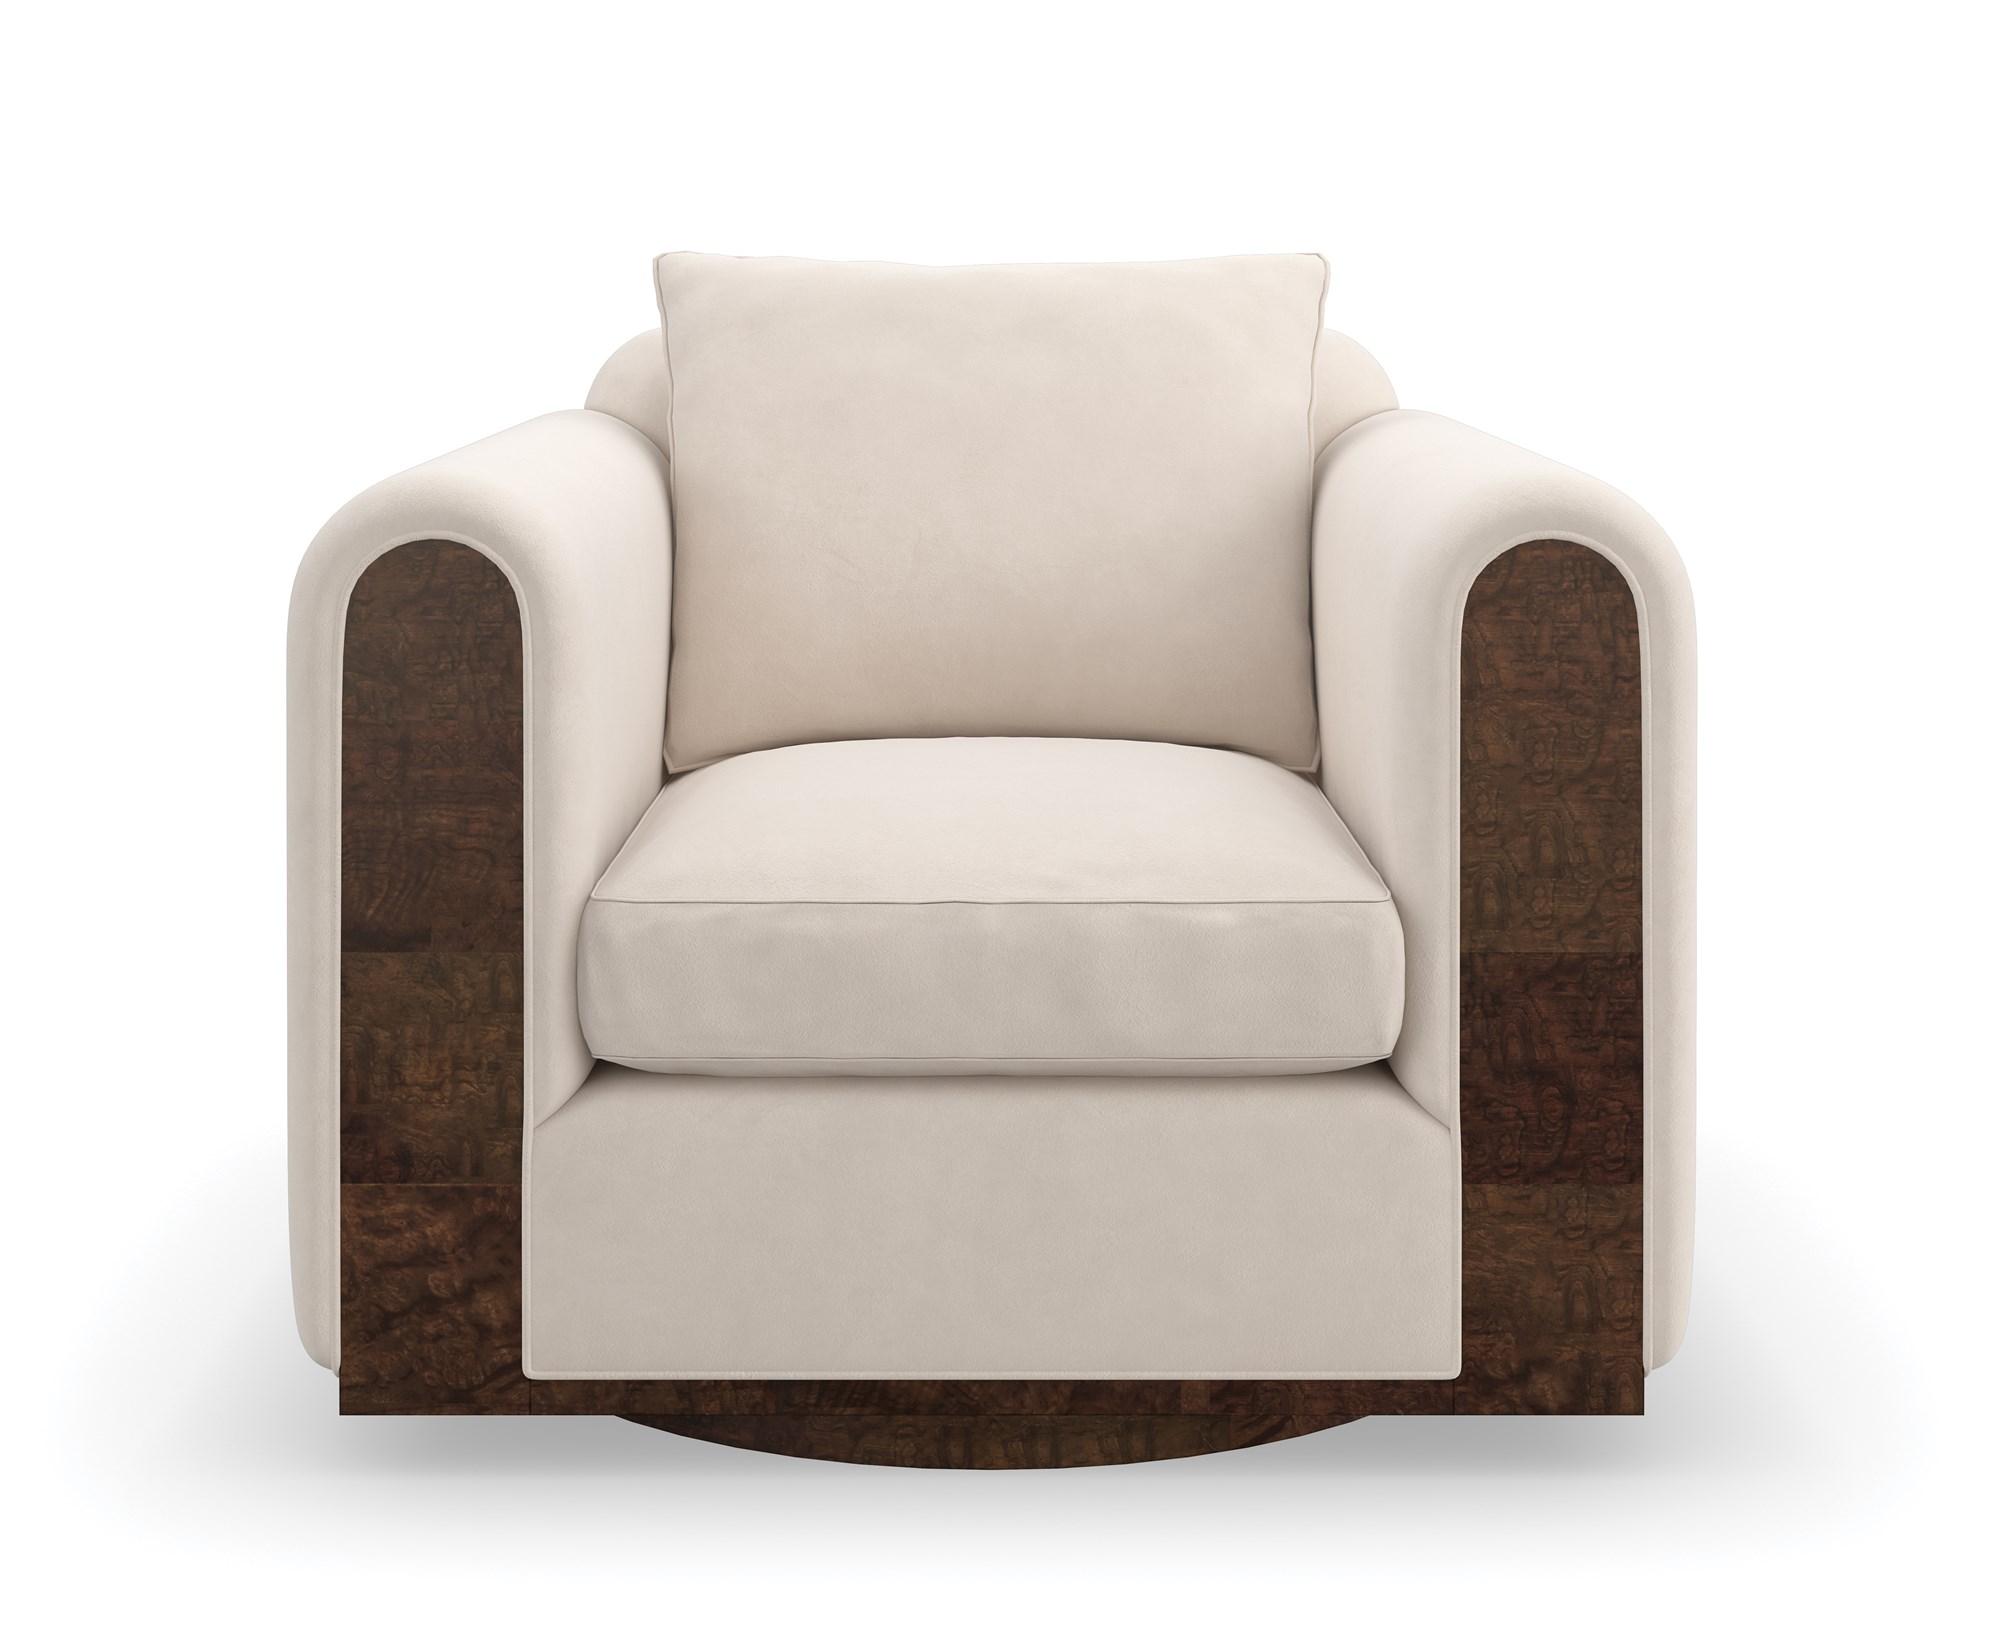 

    
Performance Cream Fabric & Galway Burl Finish Fabric DIMITRI CHAIR by Caracole
